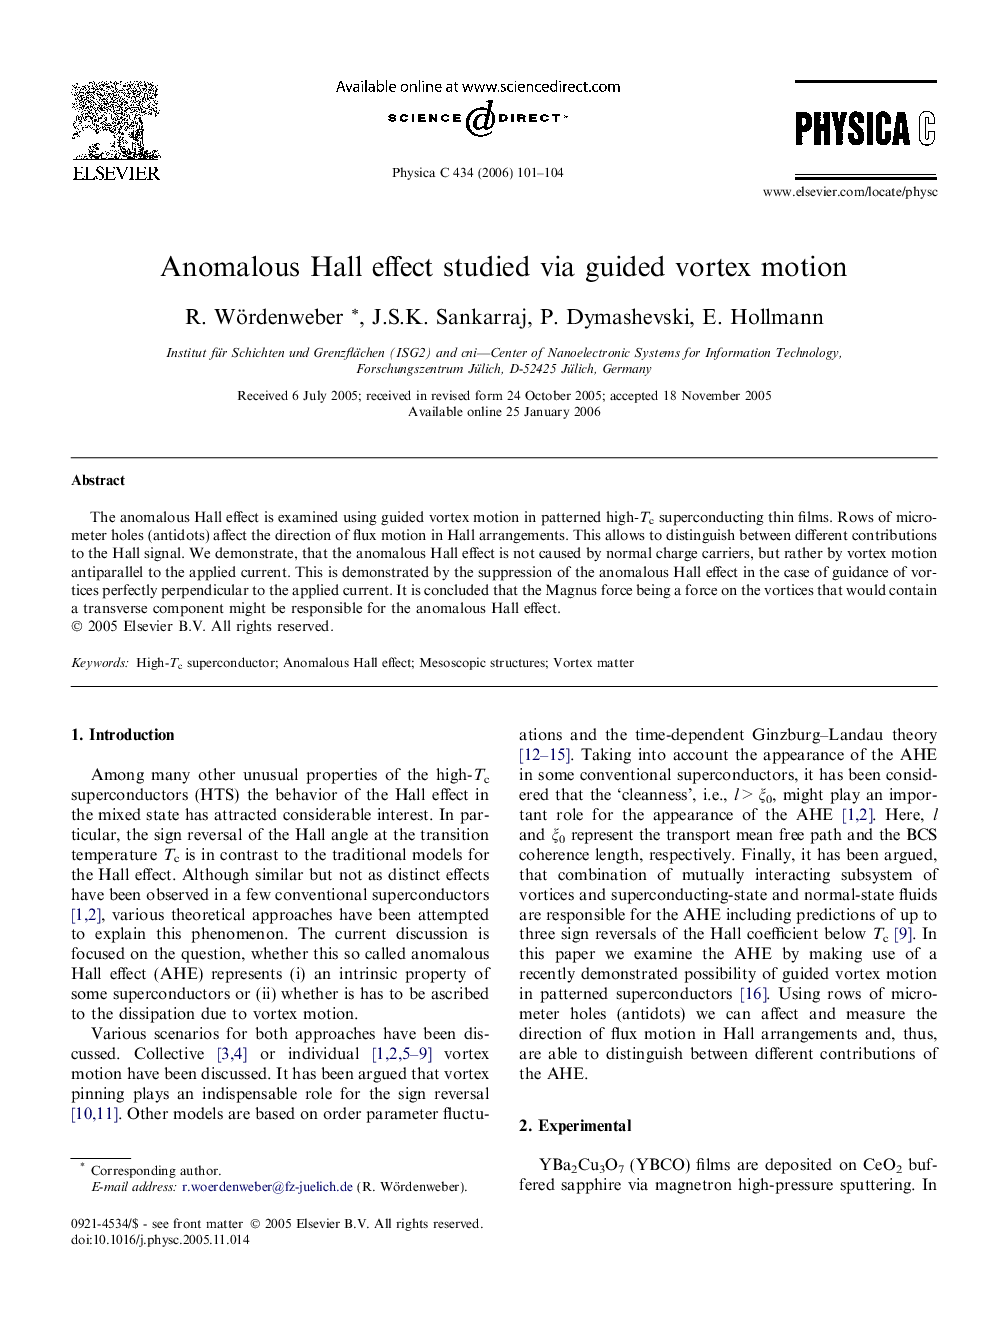 Anomalous Hall effect studied via guided vortex motion